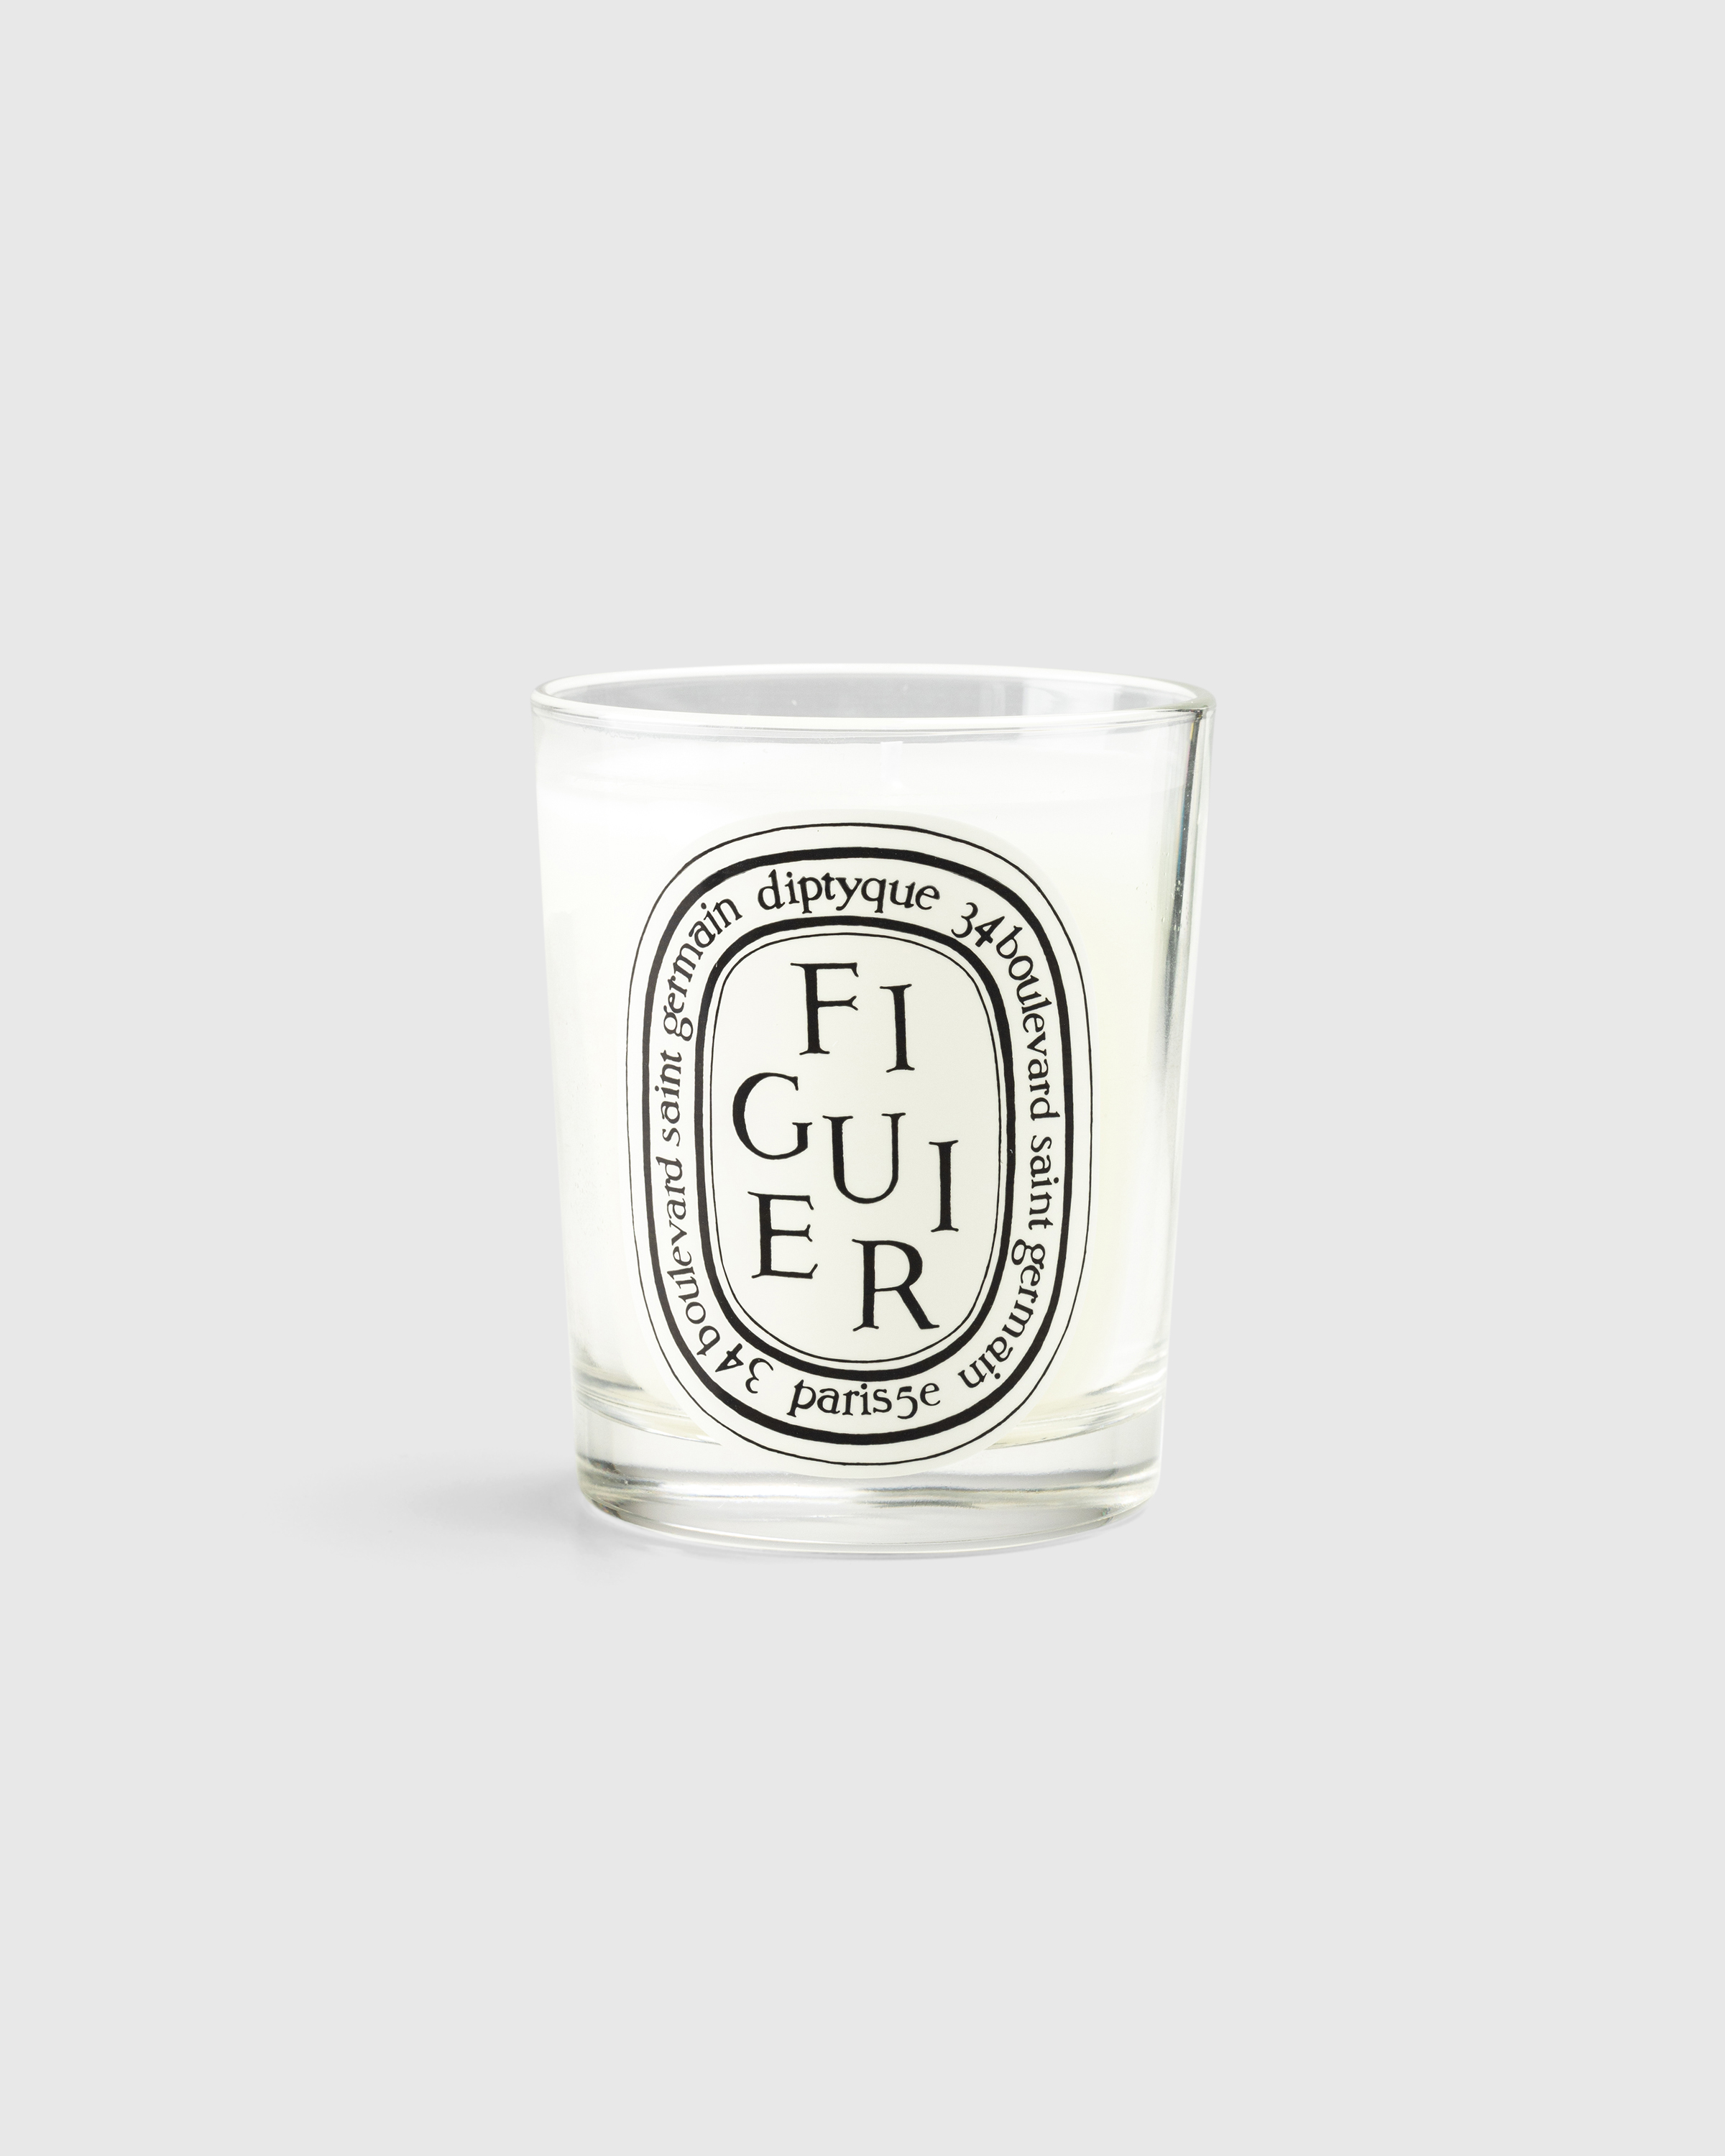 Diptyque – Standard Candle Figuier 190g - Candles & Fragrances - White - Image 1